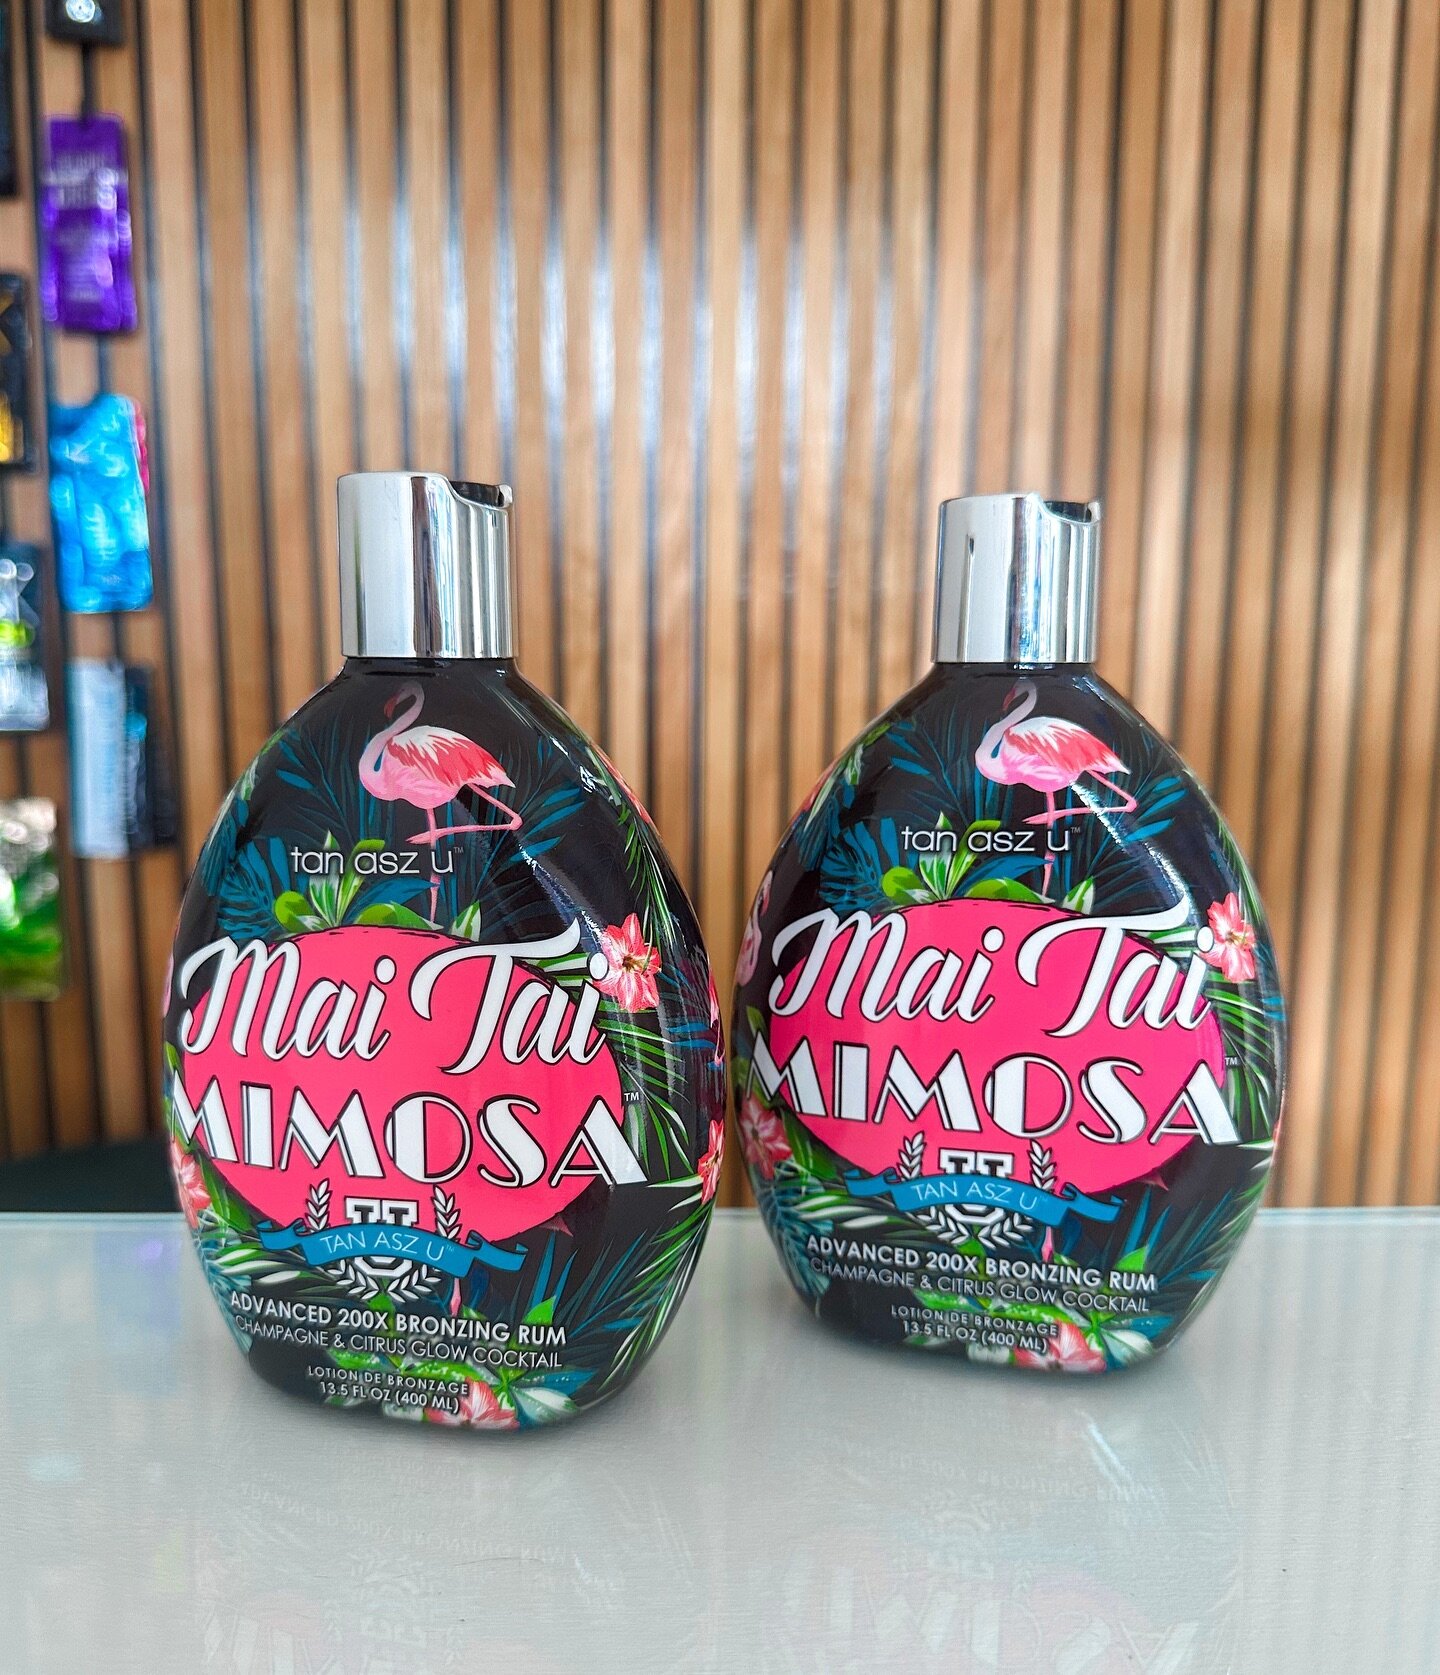 New in!✨
Mai Tai Mimosa - Advanced 200X Bronzing Rum

- Advanced 200X Bronzer
- Champagne &amp; Citrus extracts to enhance your glow
- Tigergrass extract &amp; Hemp Seed to deeply condition the skin
- DHA-free

We have a limited number of these avail